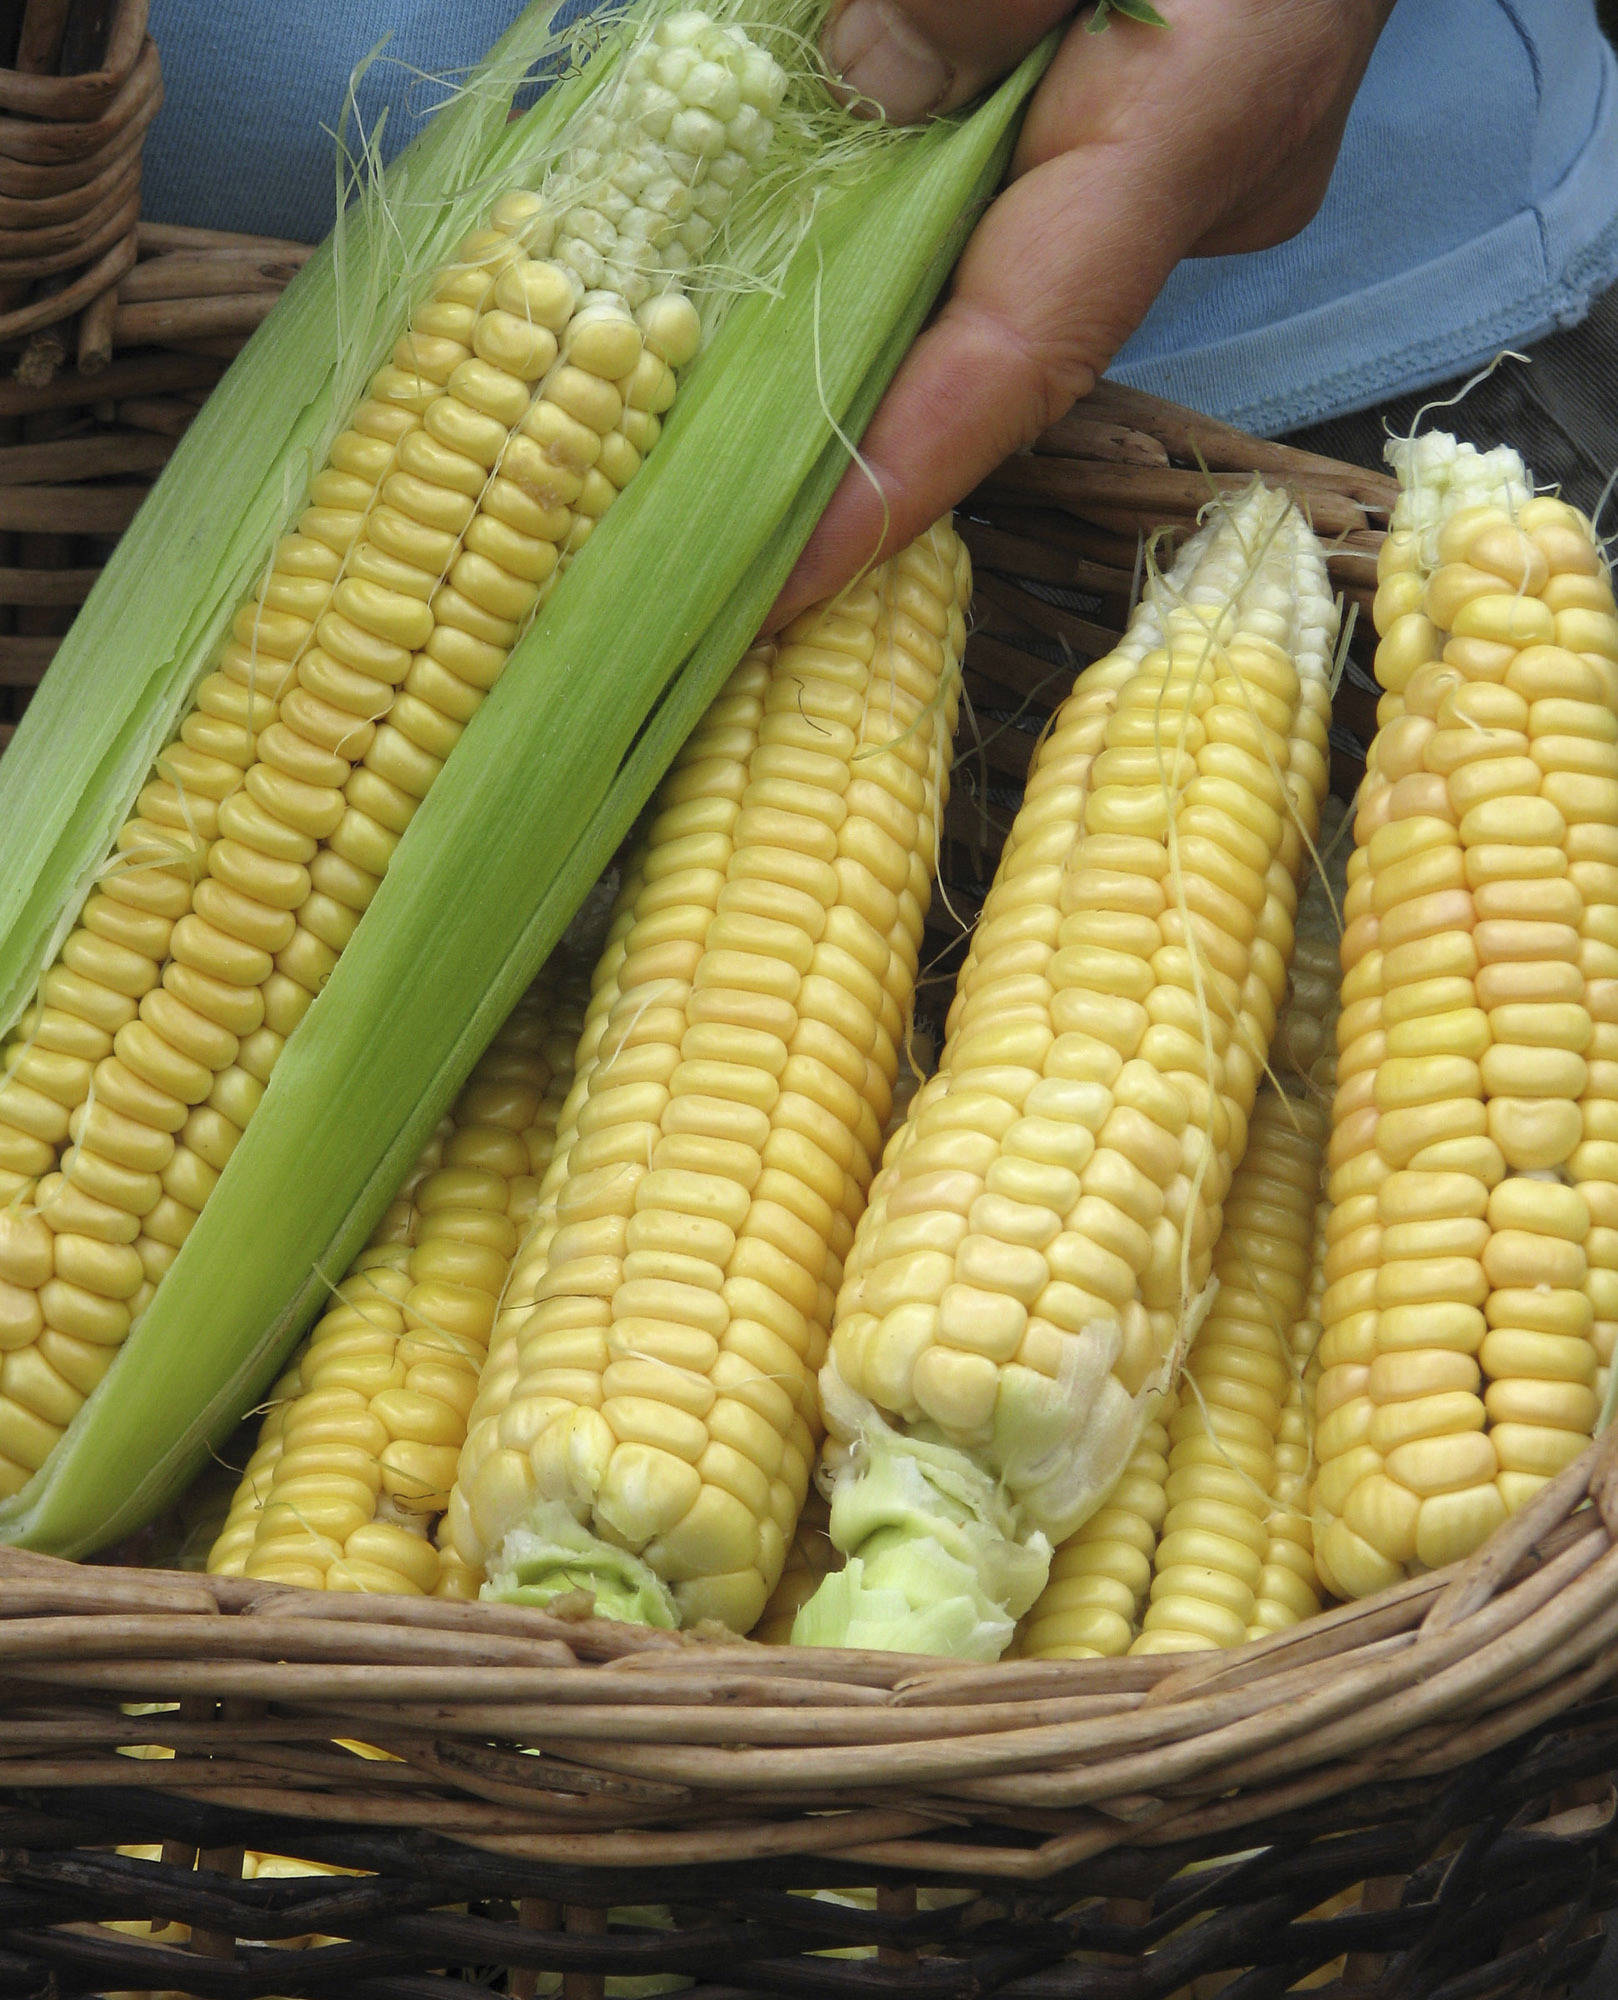 This undated photo shows Golden Bantam corn in New Paltz, N.Y. Golden Bantam is a delectable, heirloom variety of corn from which you can save seeds for sharing and for planting in years to come — as long it is grown in isolation from other varieties of corn. (Lee Reich via AP)